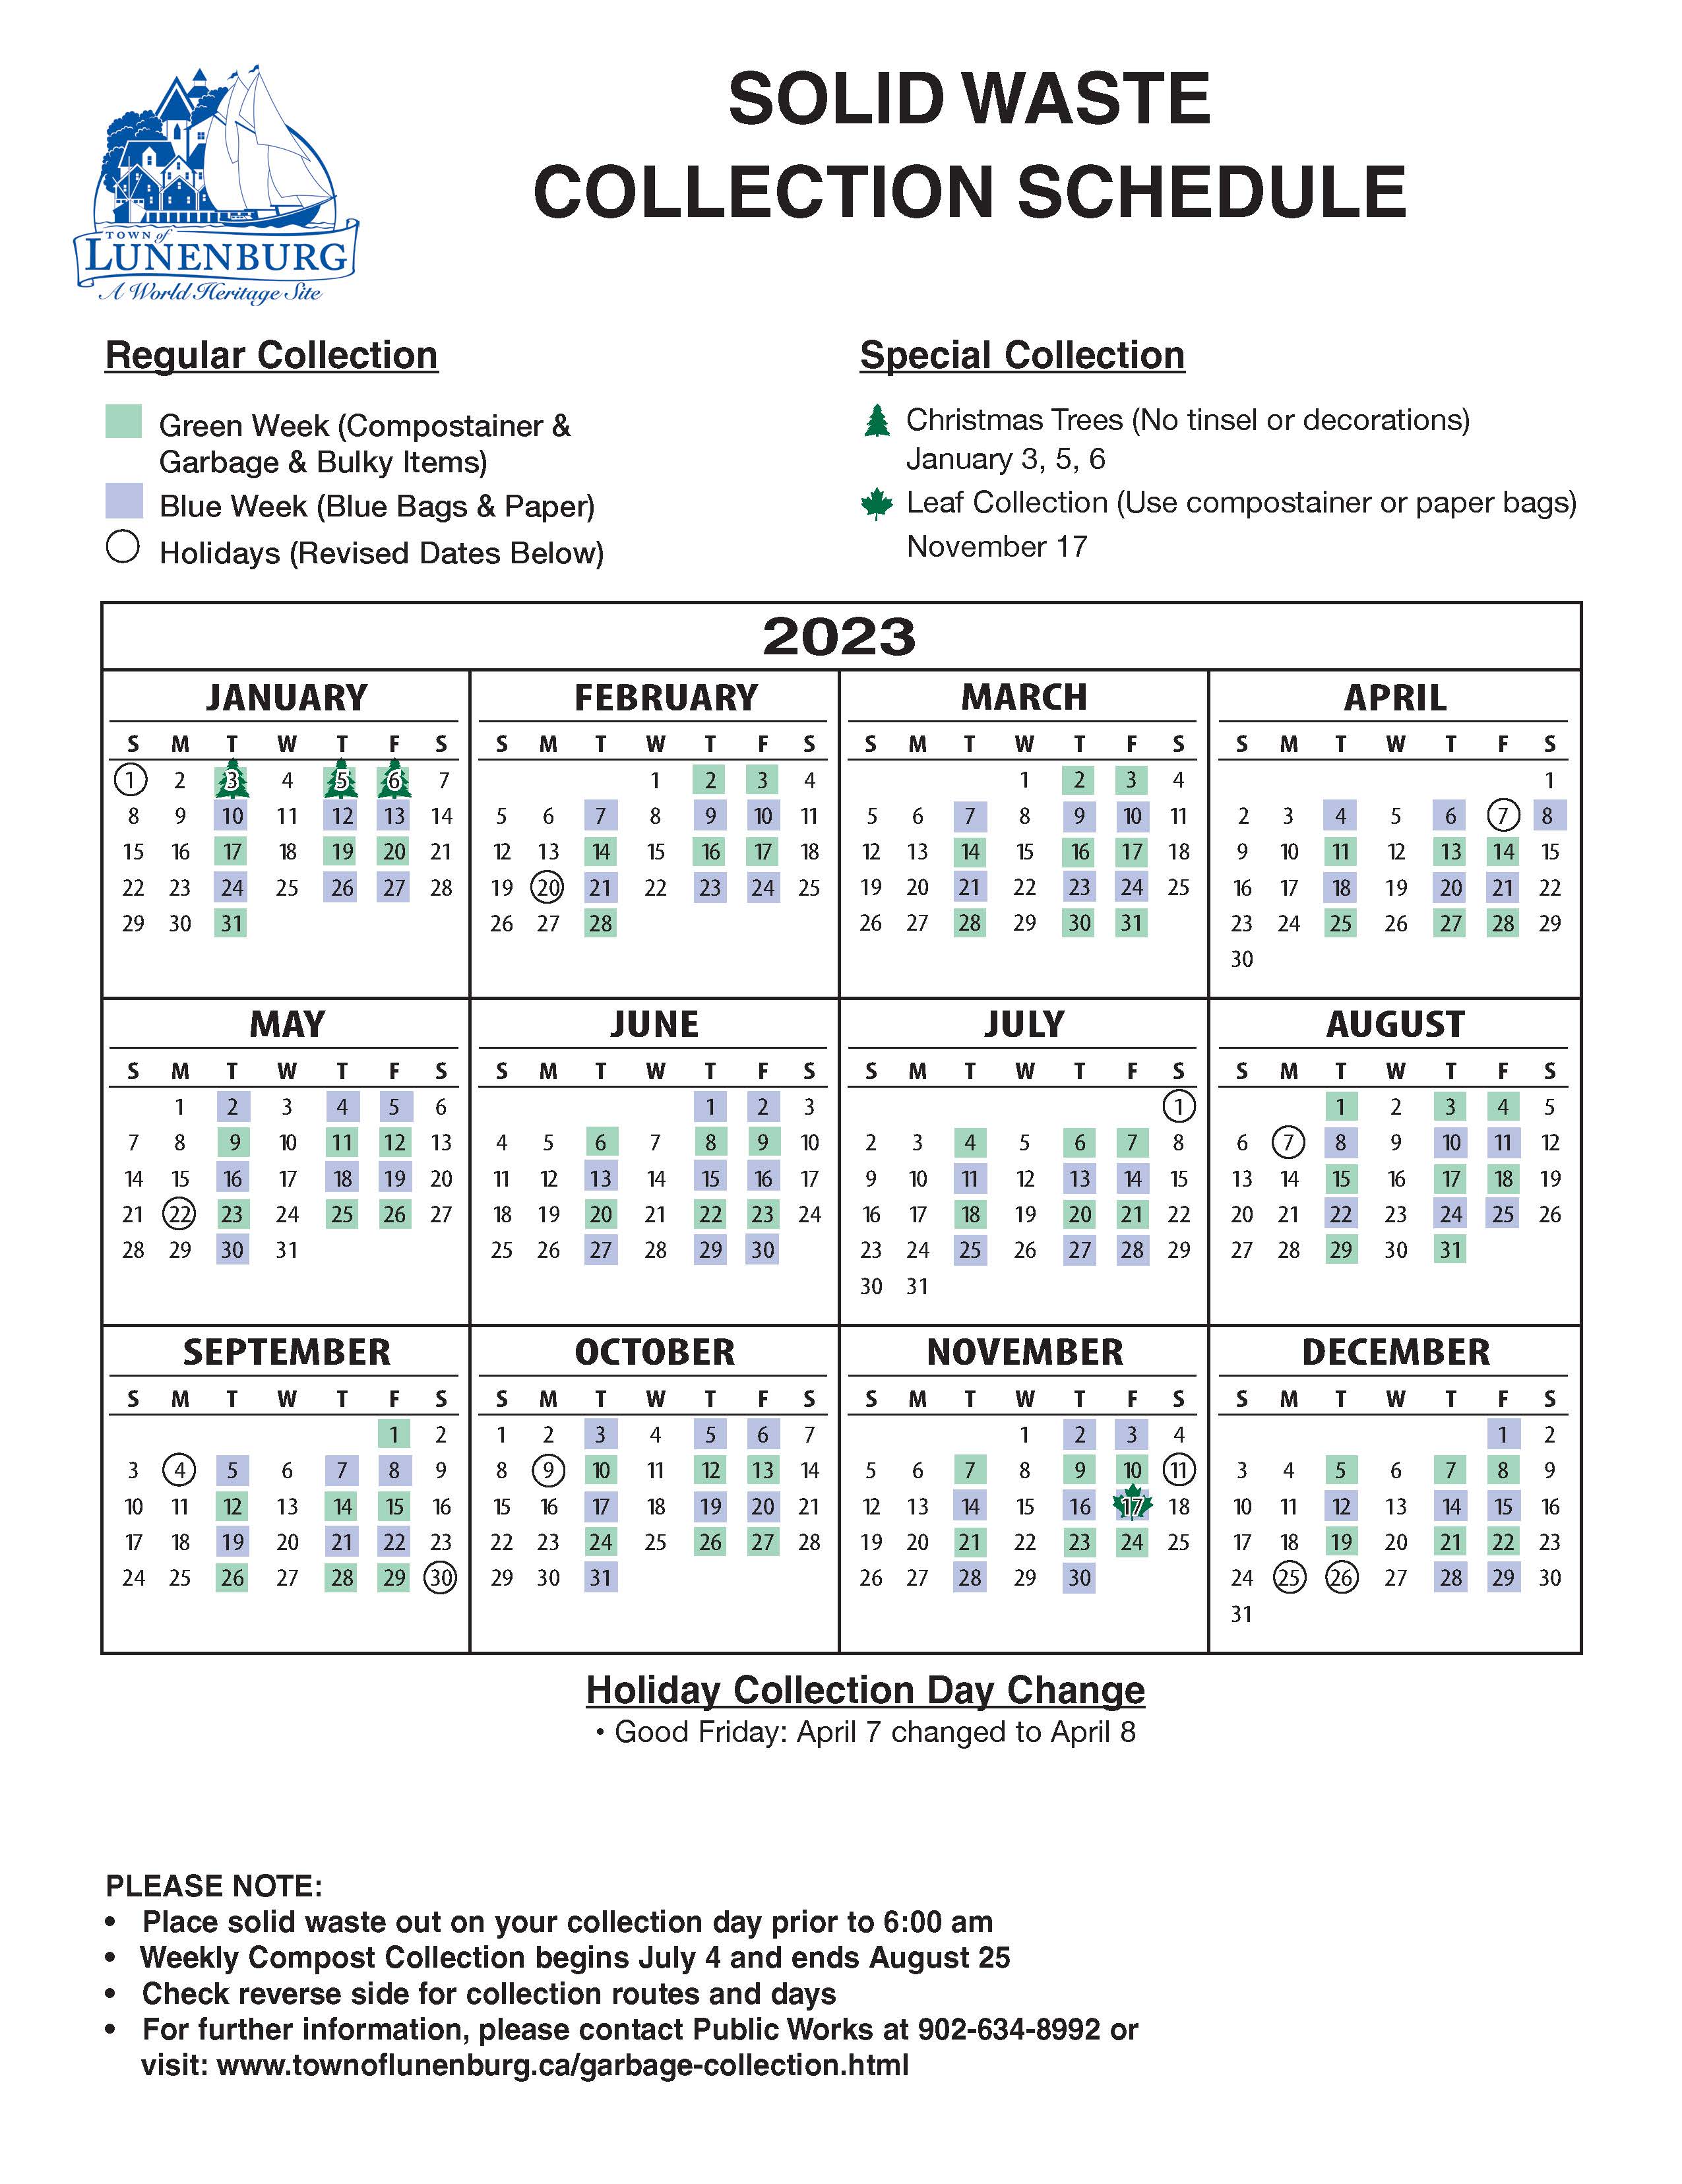 Solid Waste Collection Schedule & Map 2023 - Town of Lunenburg